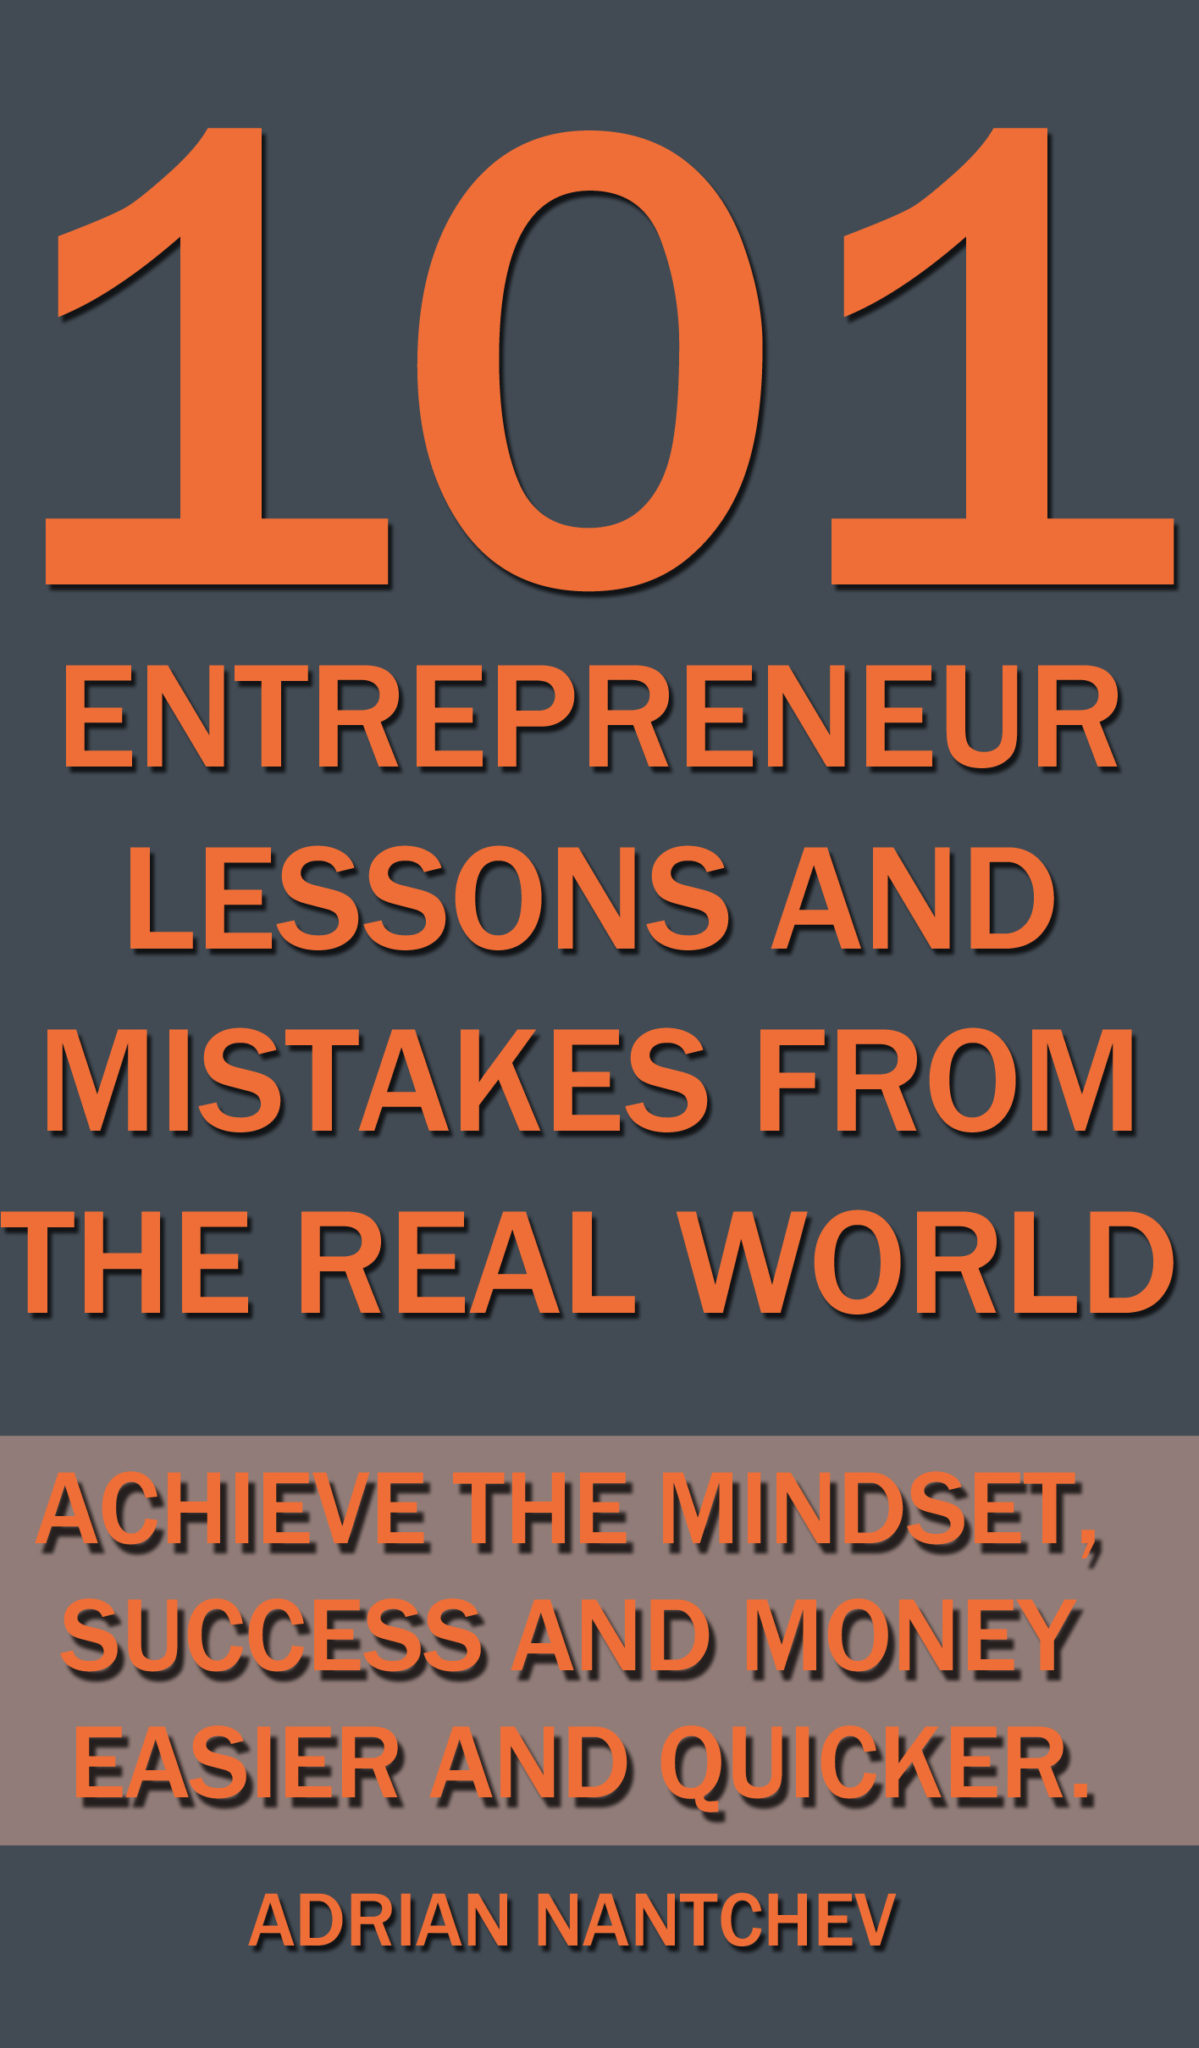 FREE: 101 Entrepreneur Lessons and Mistakes From The Real World: Achieve the Mindset, Success and Money Easier and Quicker by Adrian Nantchev